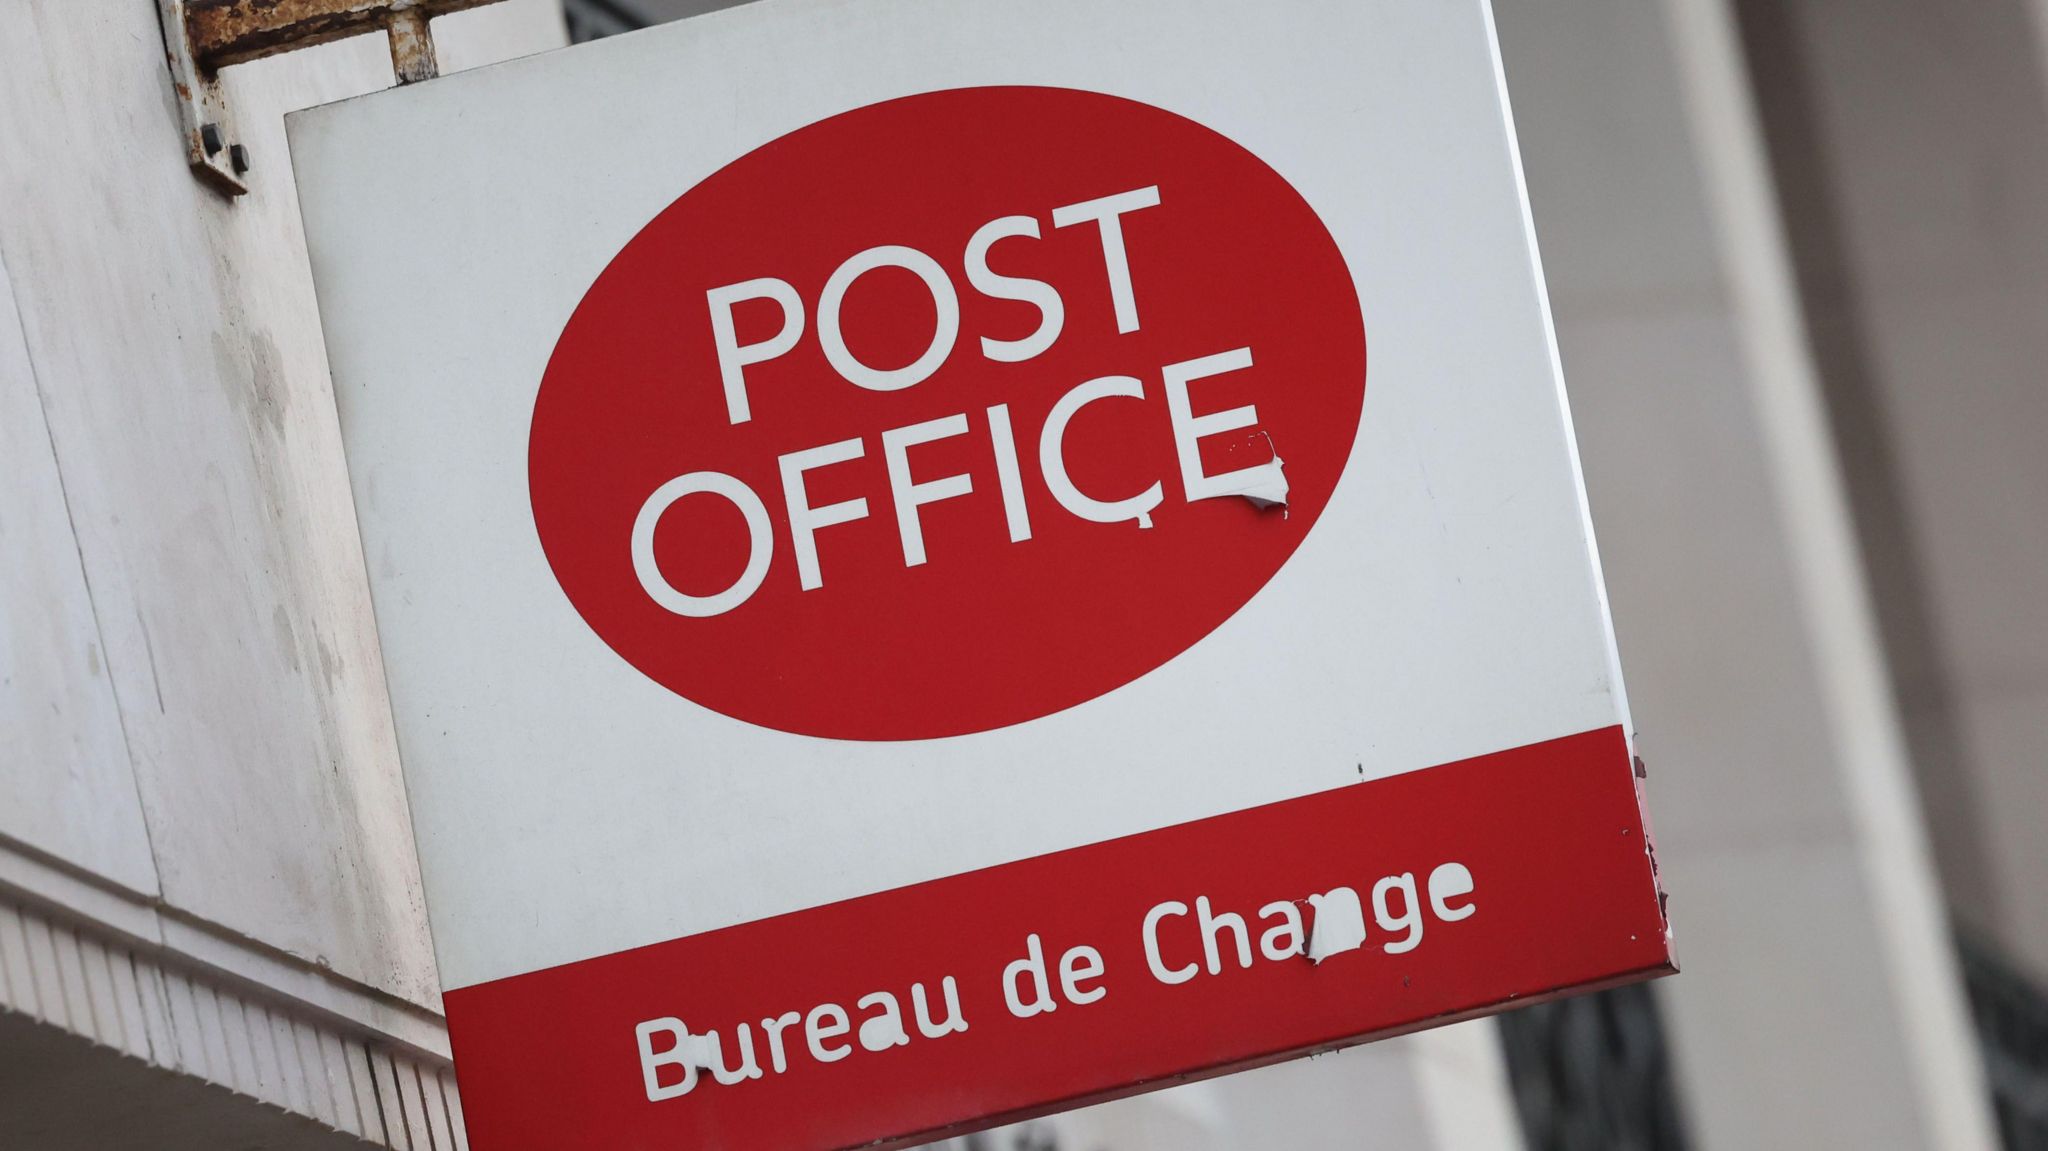 Post Office signage